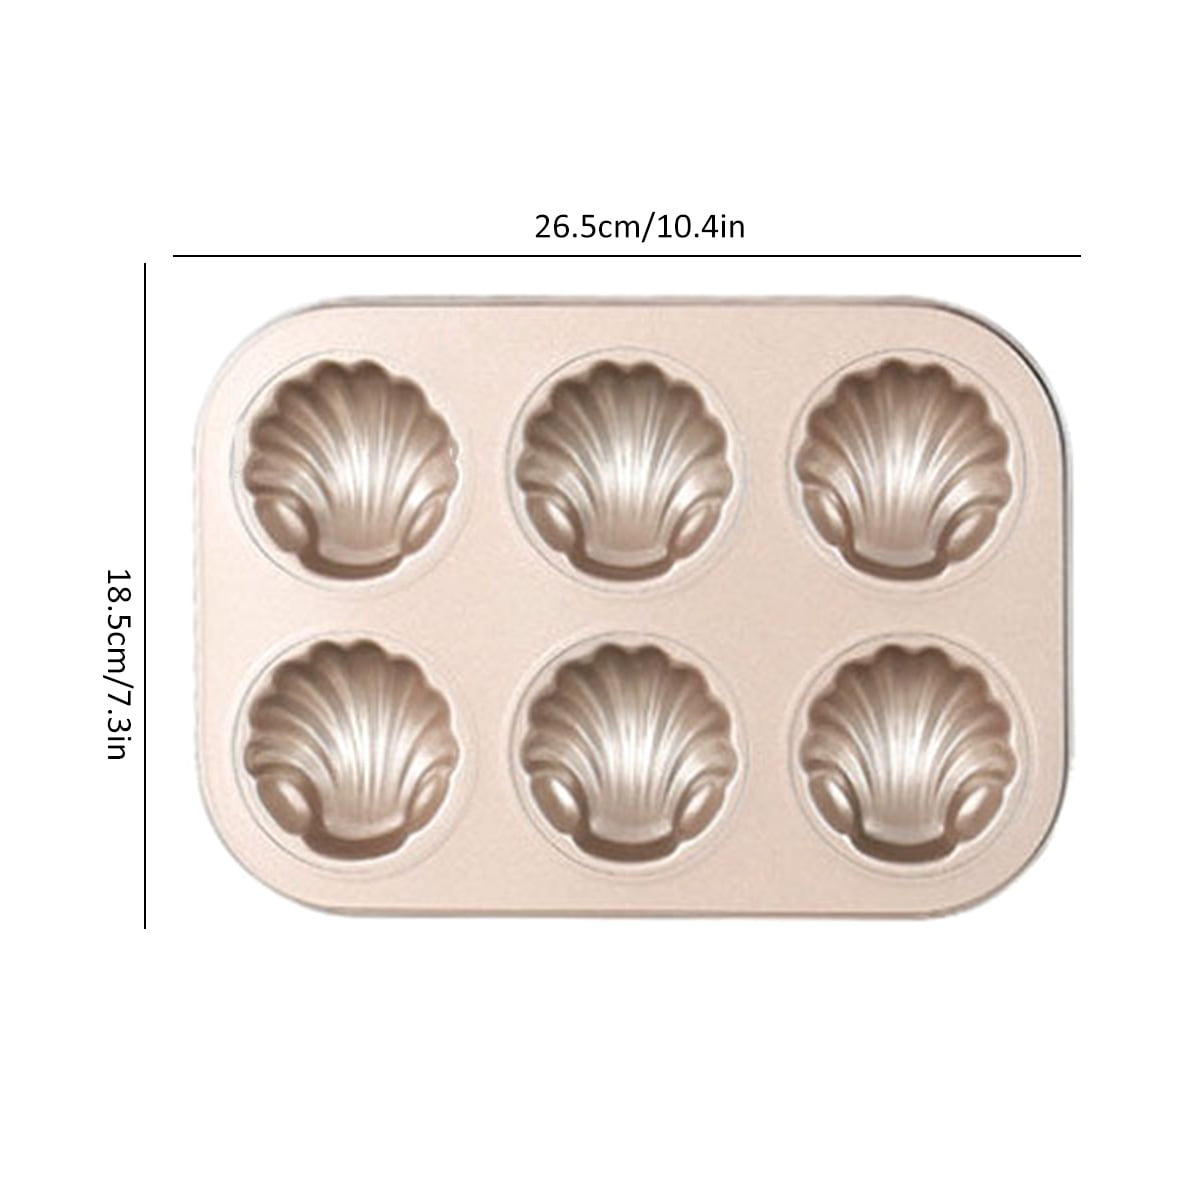 Generic Silicone Shell Cookie Pan Madeleine Baking Tray Cookie Mold Shells 9 Cavities Random Color 